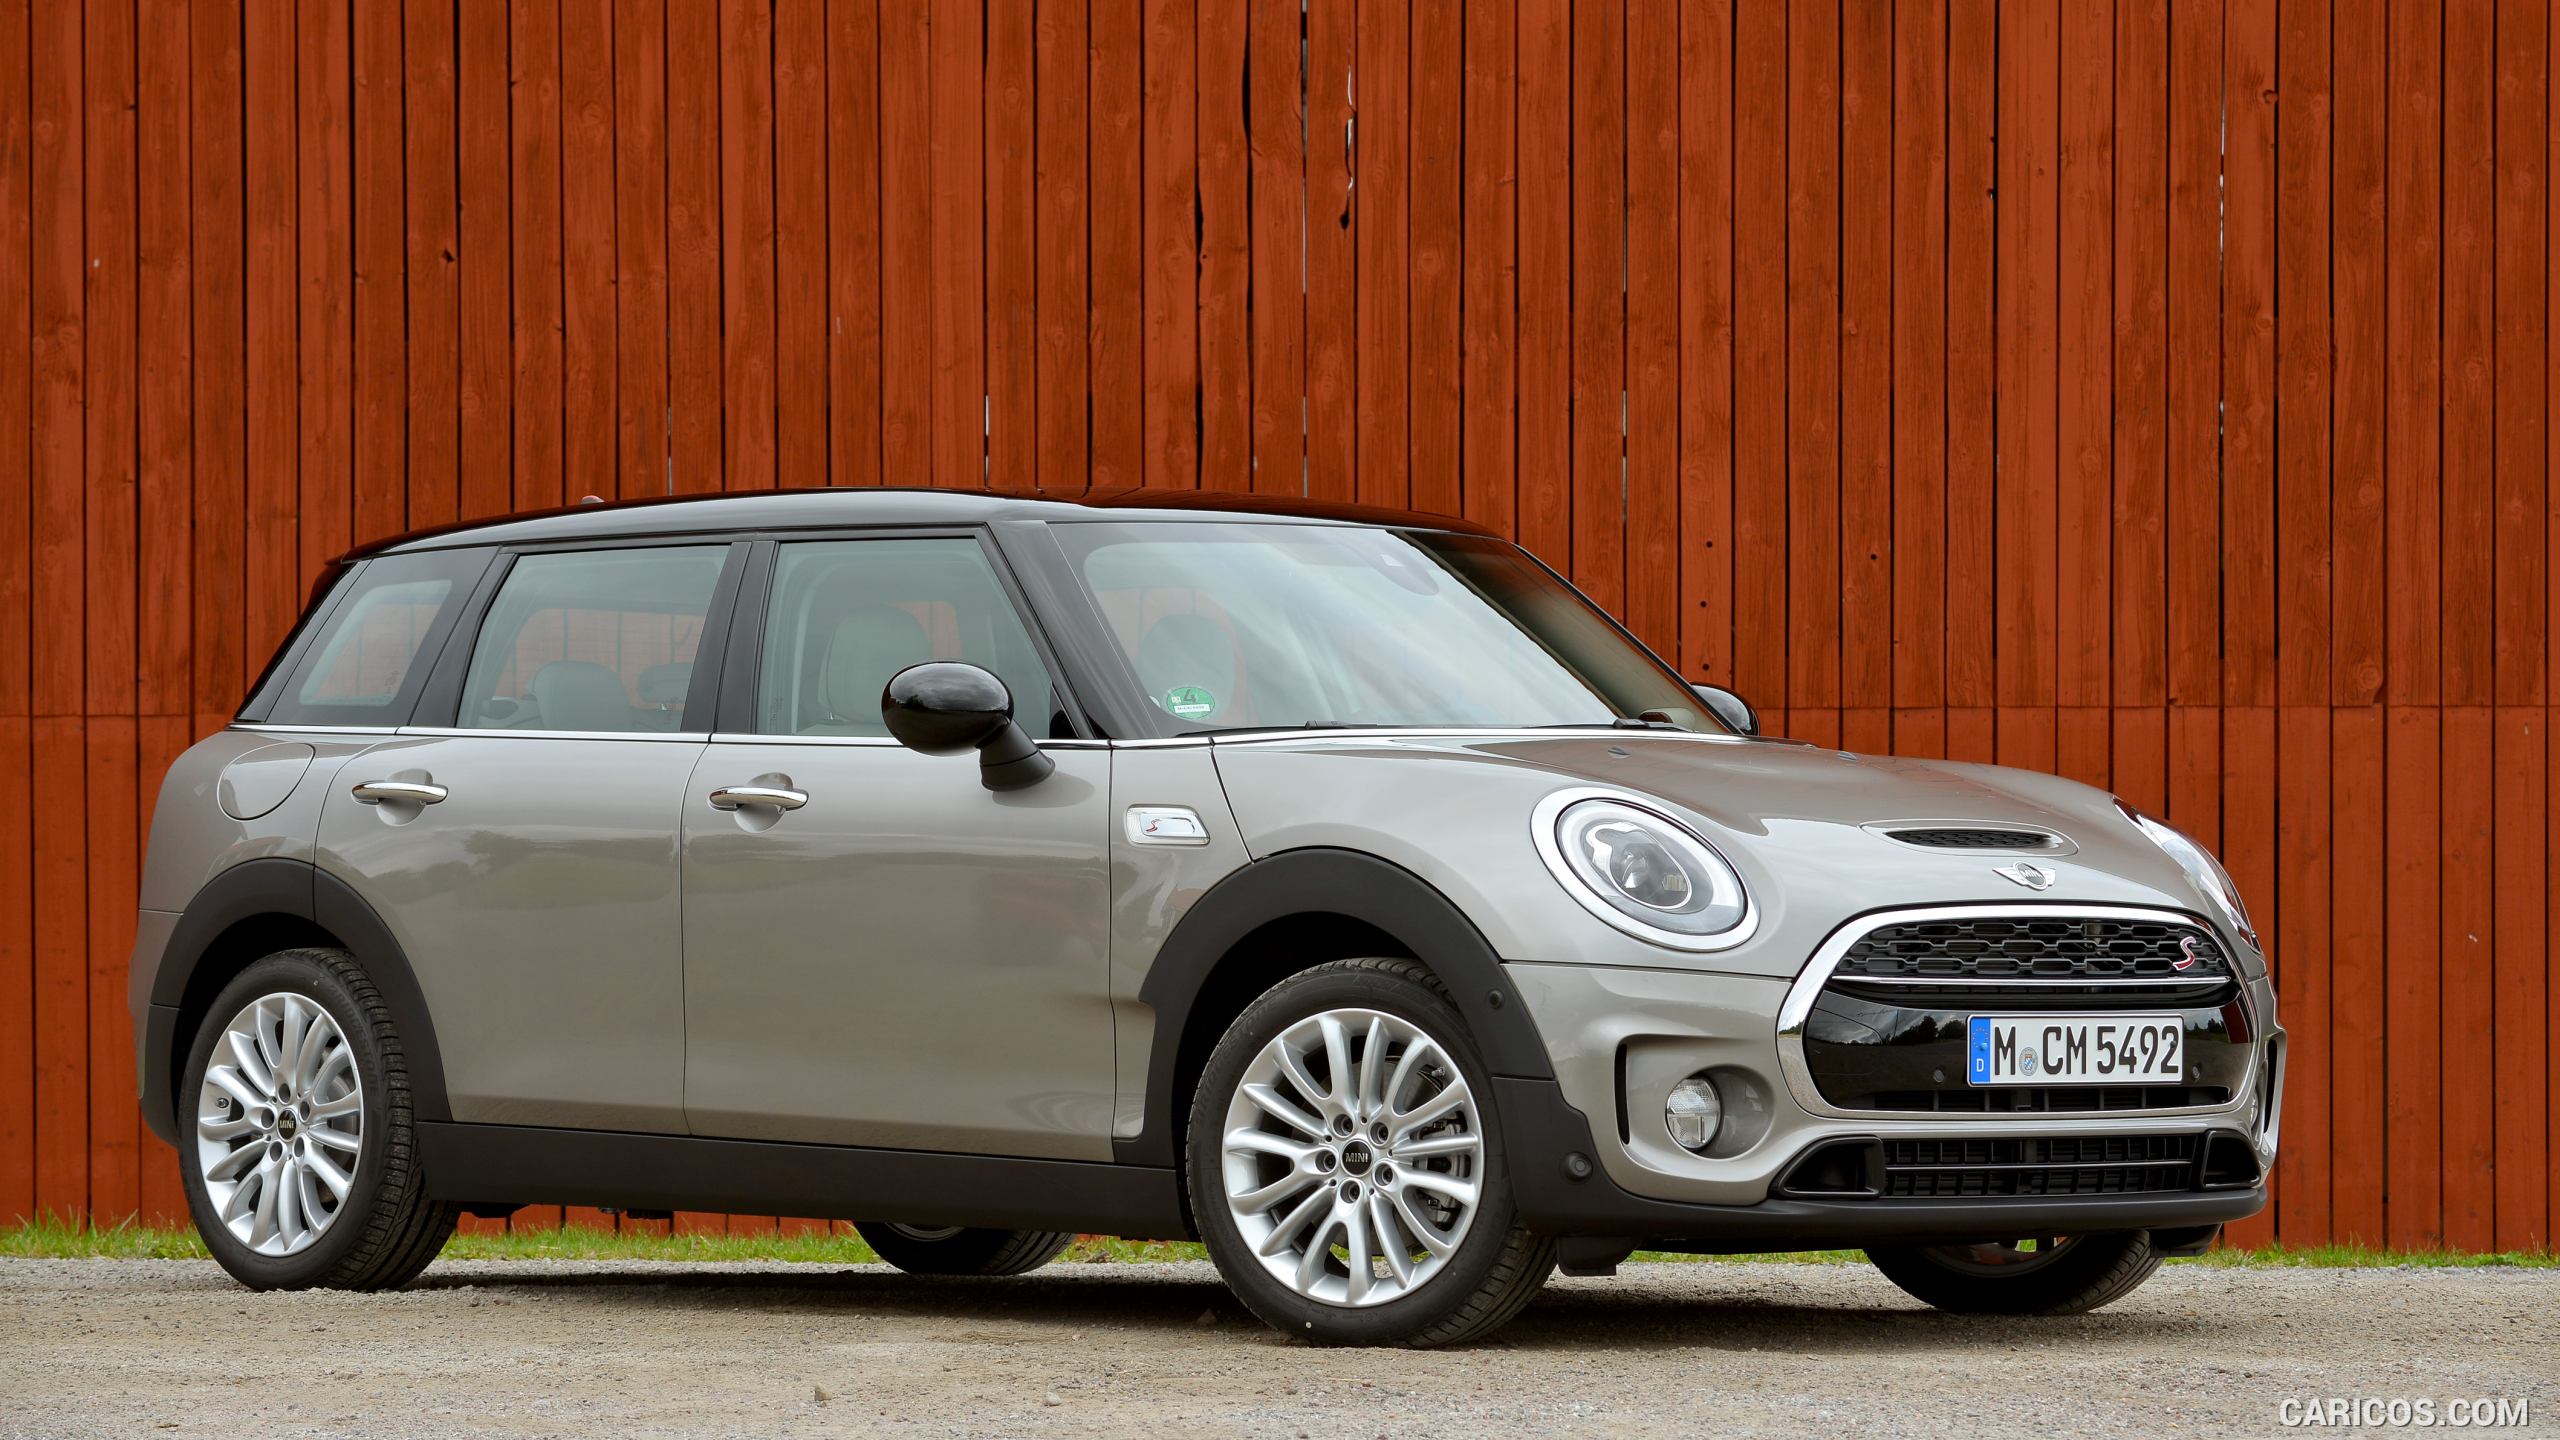 2016 MINI Cooper S Clubman in Metallic Melting Silver - Front, #186 of 380